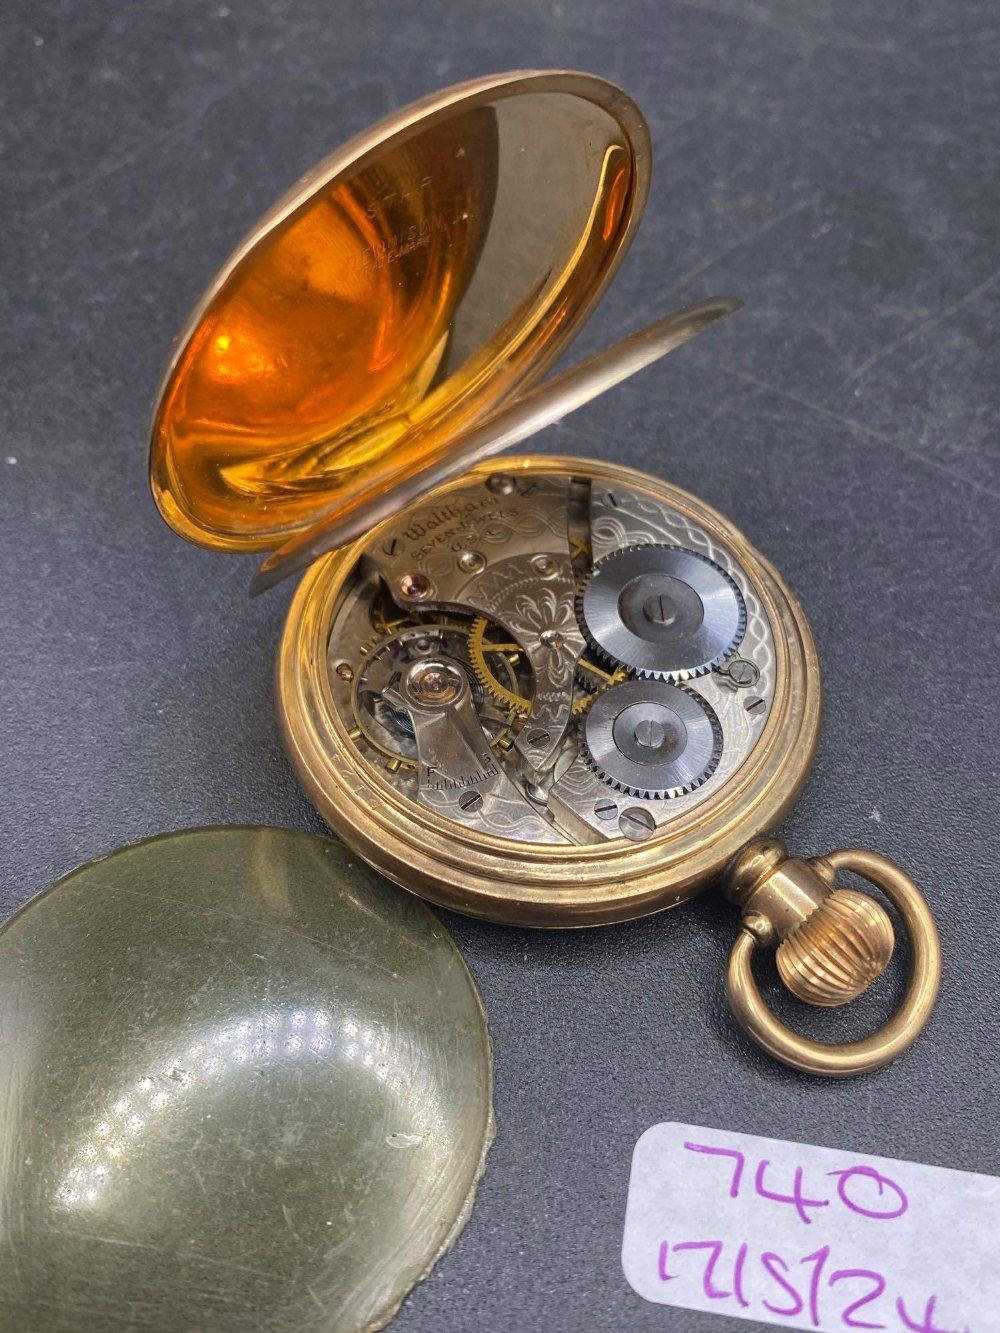 A WALTHAM rolled gold pocket watch with seconds dial - Image 2 of 3